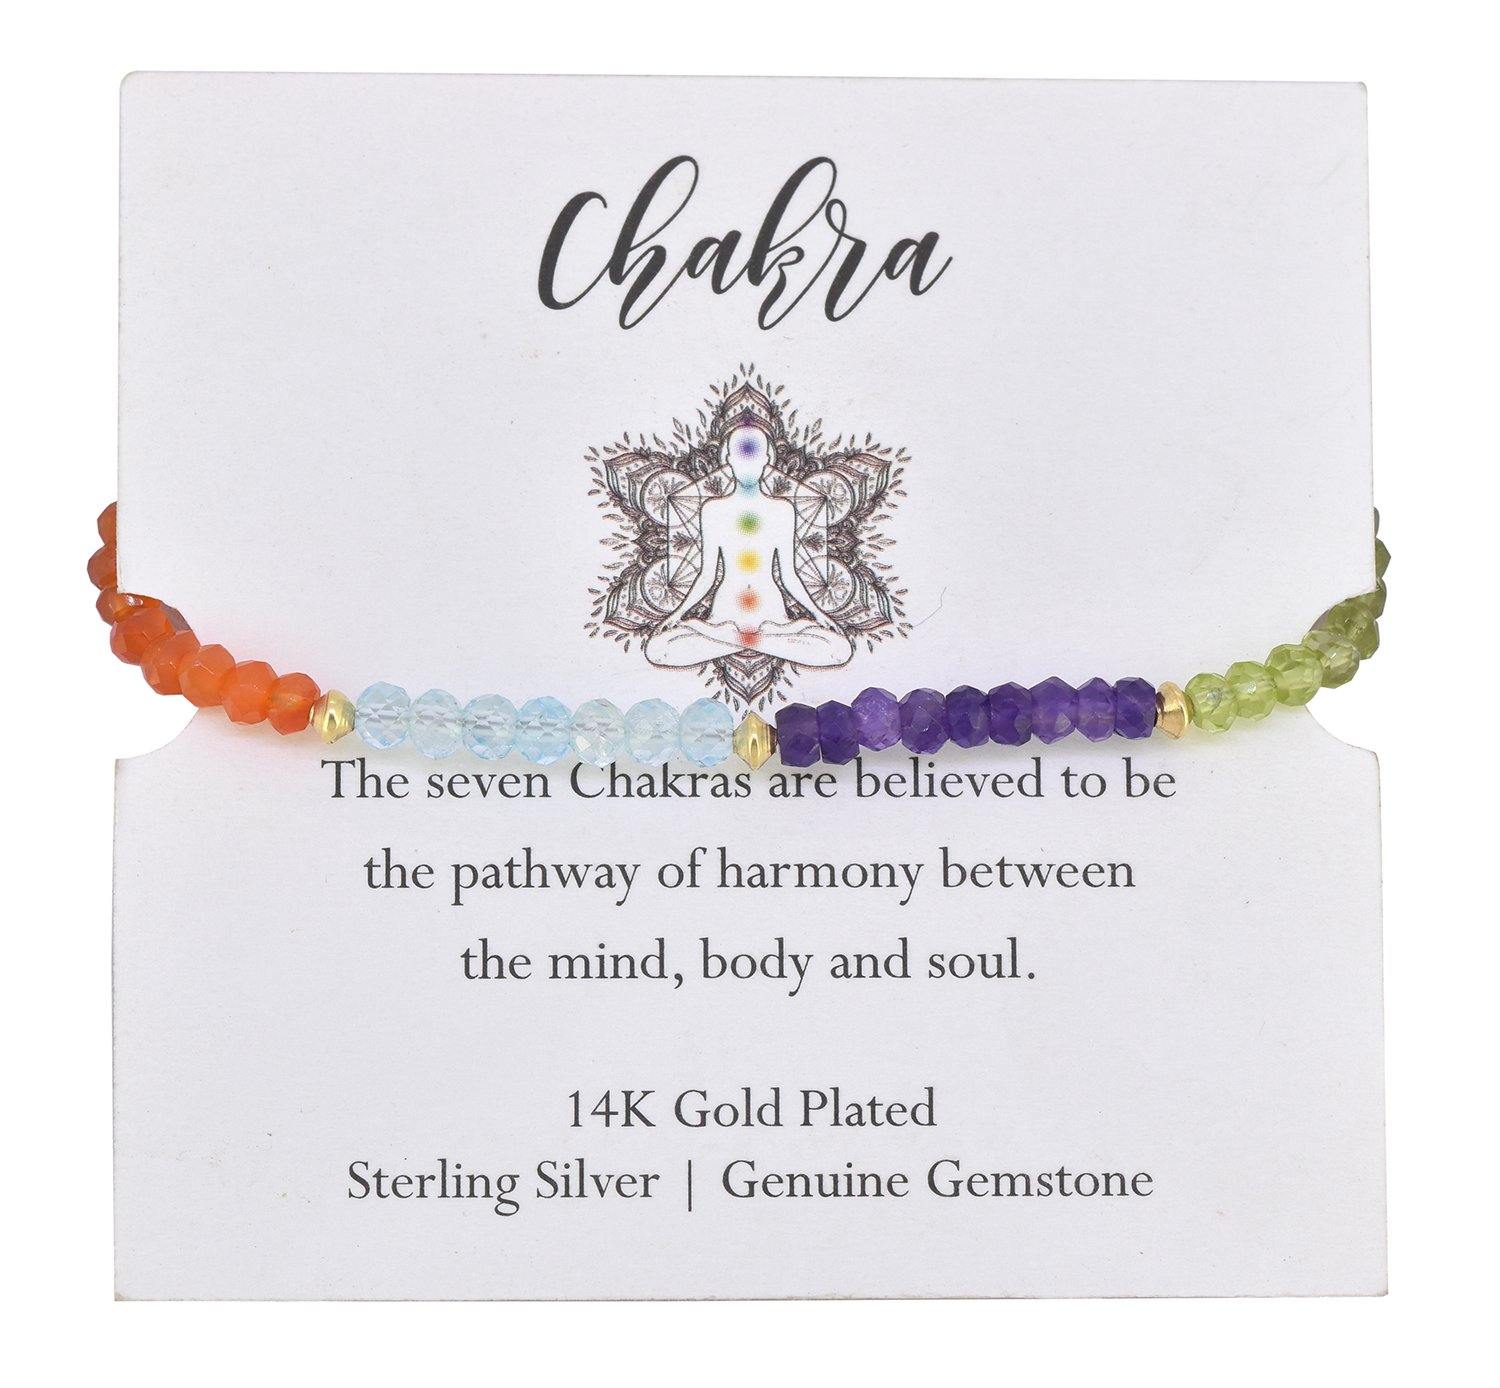 Chakra Stone Solid Sterling Silver Gold Plated Link Chain Bracelet 8" - YoTreasure